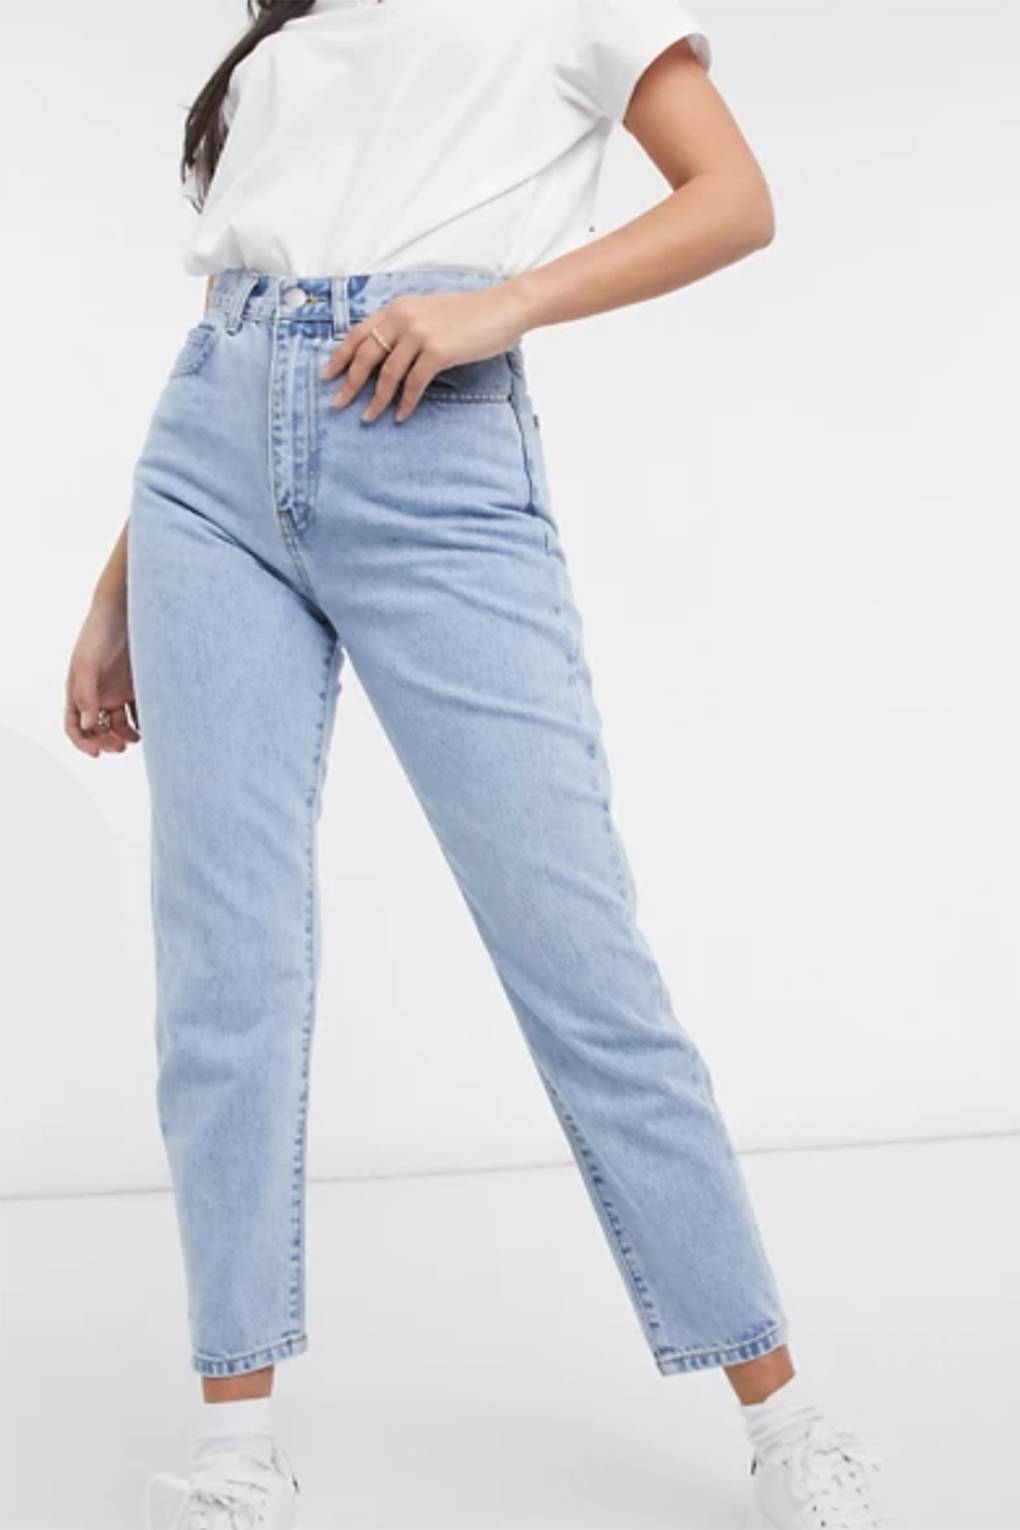 Top Three Fits of Petite Madewell Jeans  Pumps  Push Ups